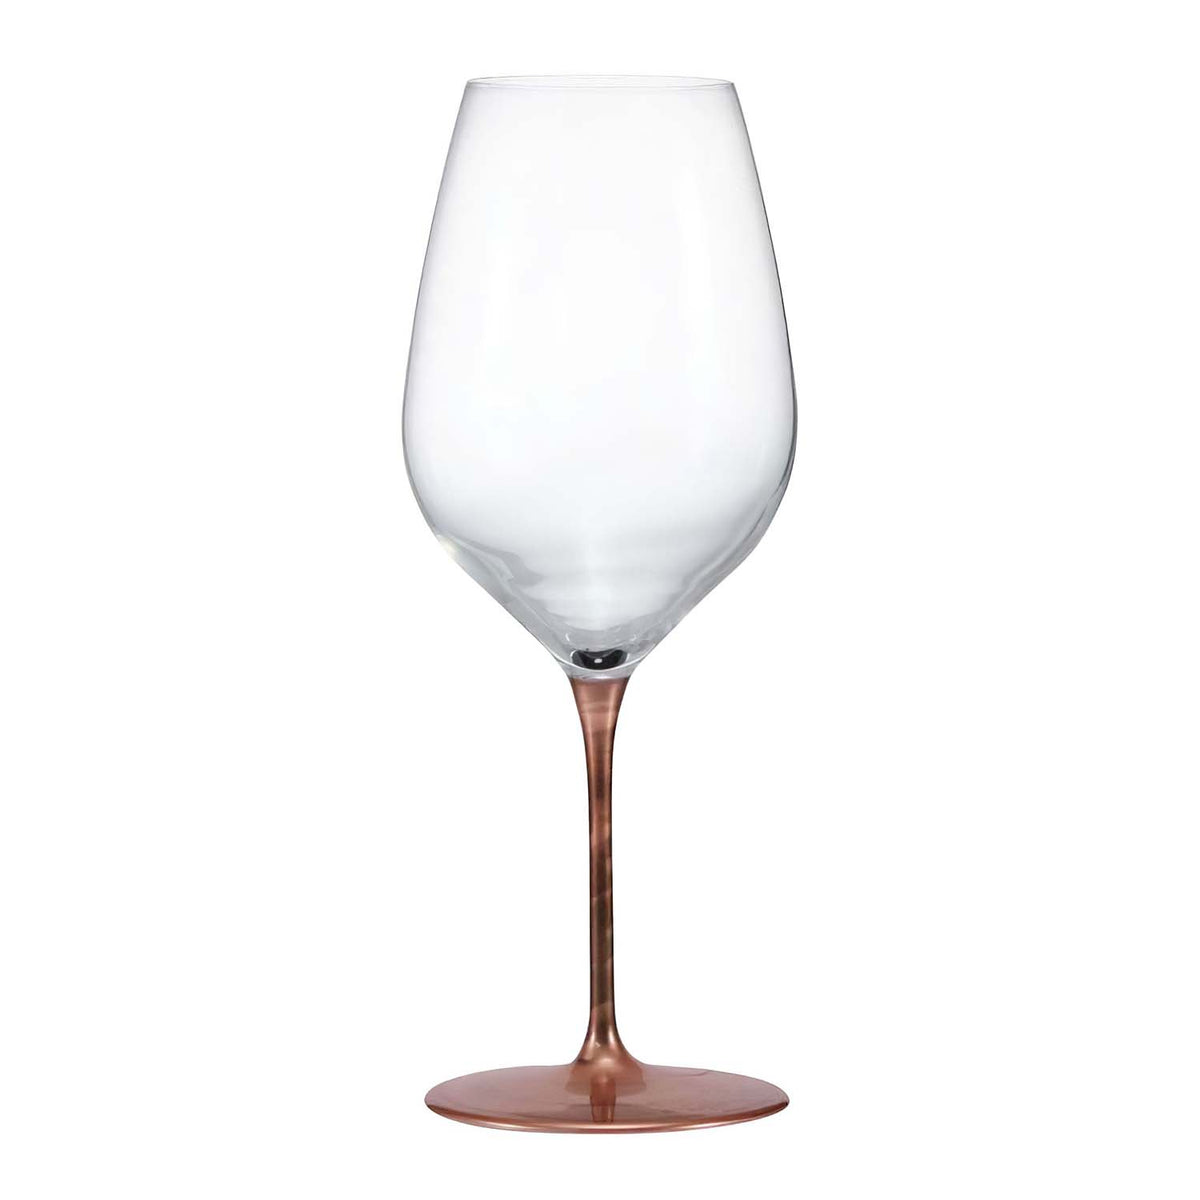 EBM Crystal Glass Lacquered Pair Wine Glass